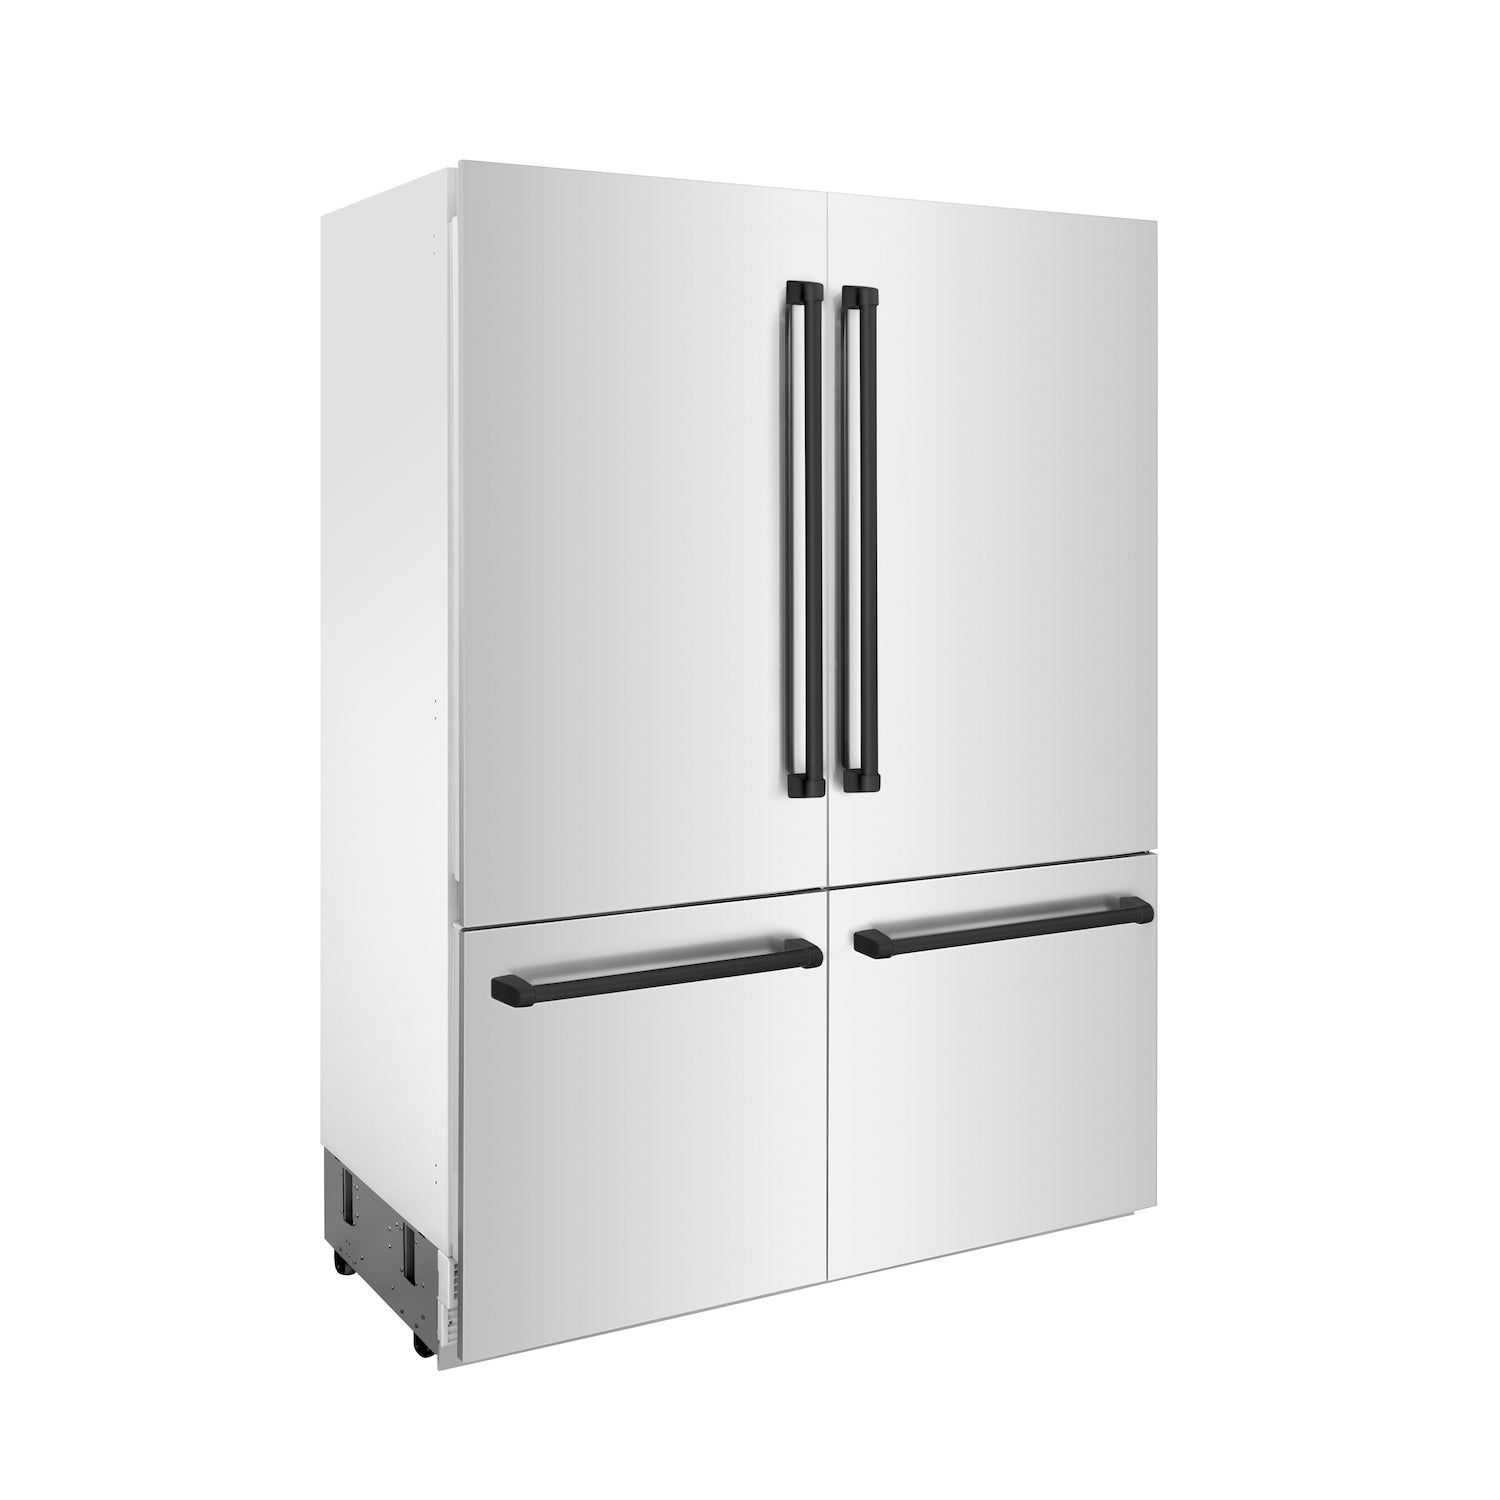 ZLINE Autograph Edition 60" Built-in 4-Door French Door Refrigerator - Stainless Steel with Matte Black Accents, Internal Water and Ice Dispenser